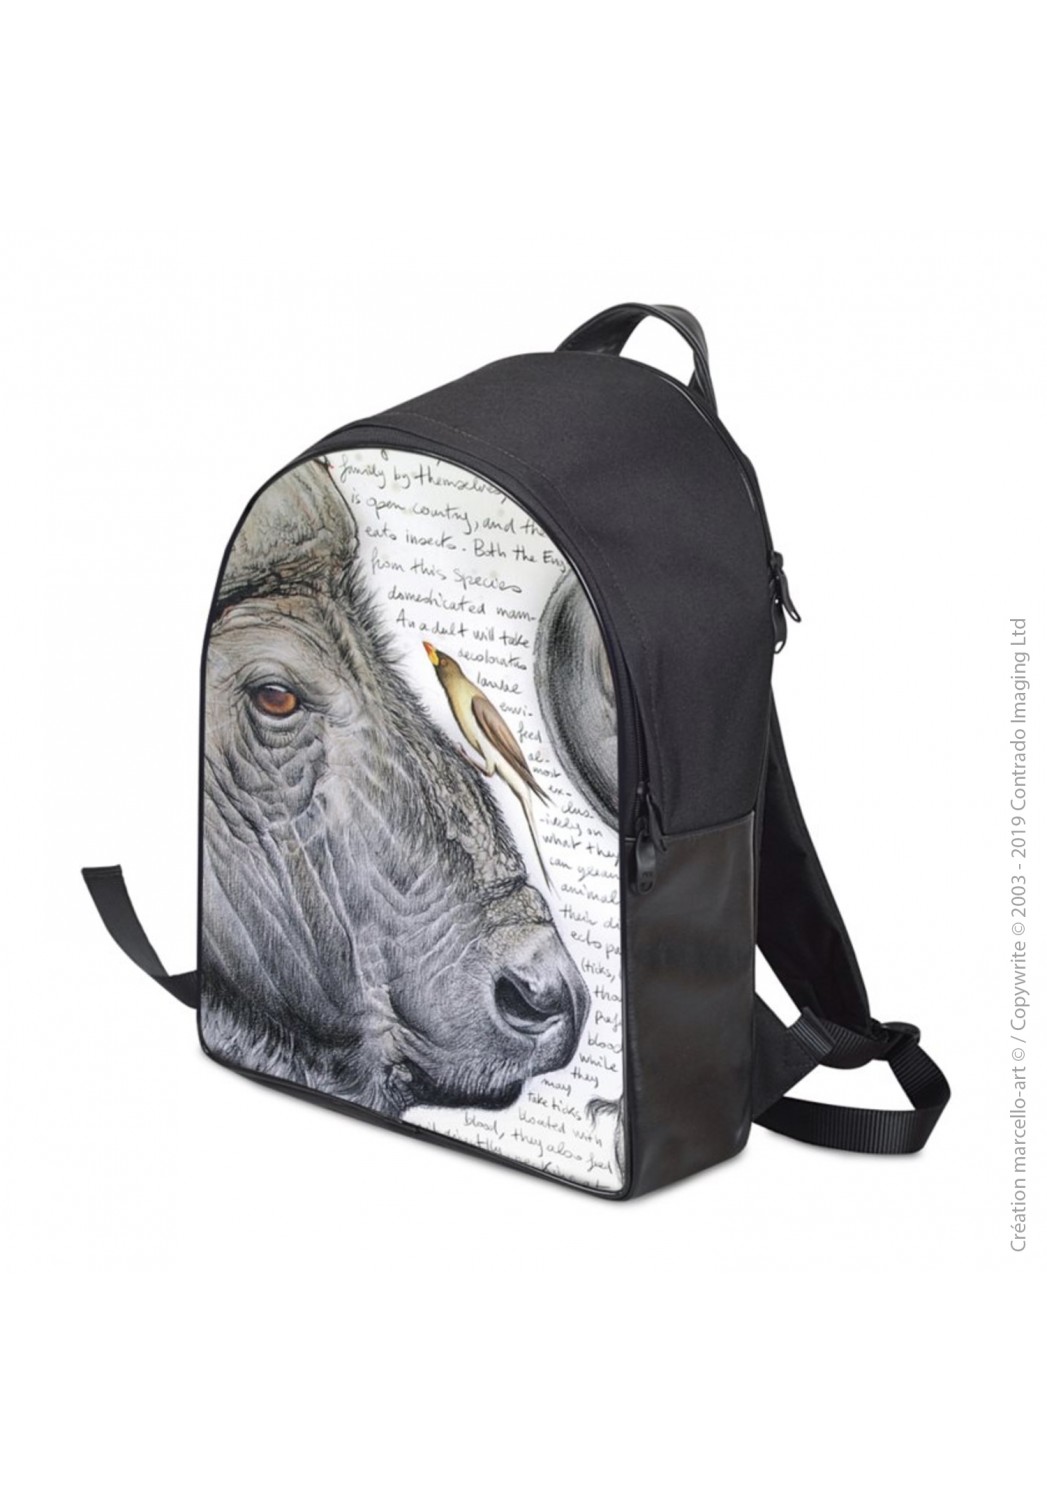 Marcello-art: Fashion accessory Backpack 227 red-billed Oxpecker